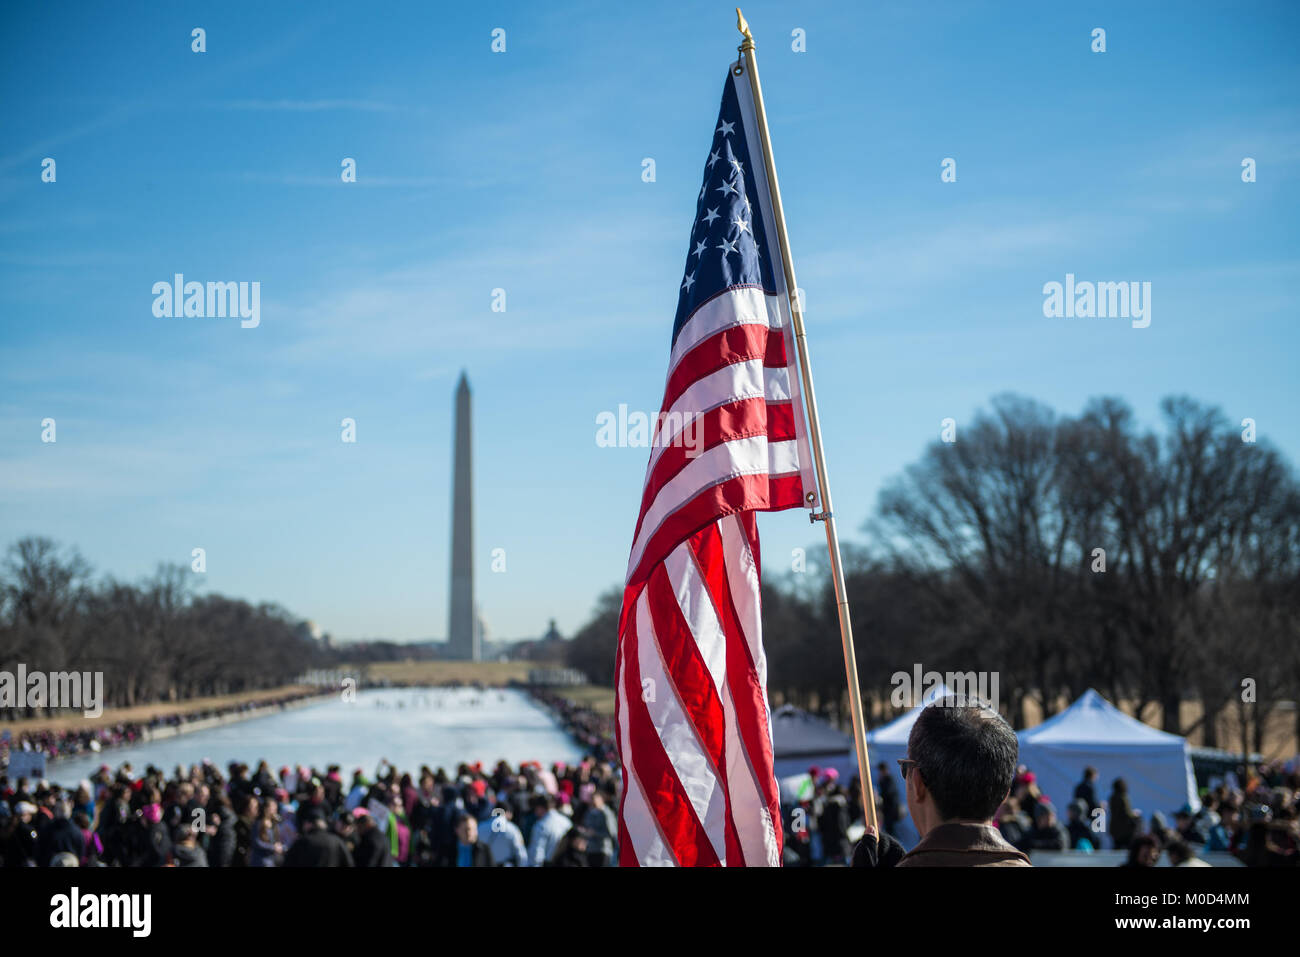 Washington DC, USA. 20th Jan, 2018. Jan. 20th Jan, 2018. People gather during the Women's March around Lincoln Memorial in Washington, DC, on Jan. 20, 2018 in Washington Credit: csm/Alamy Live News Credit: Cal Sport Media/Alamy Live News Stock Photo